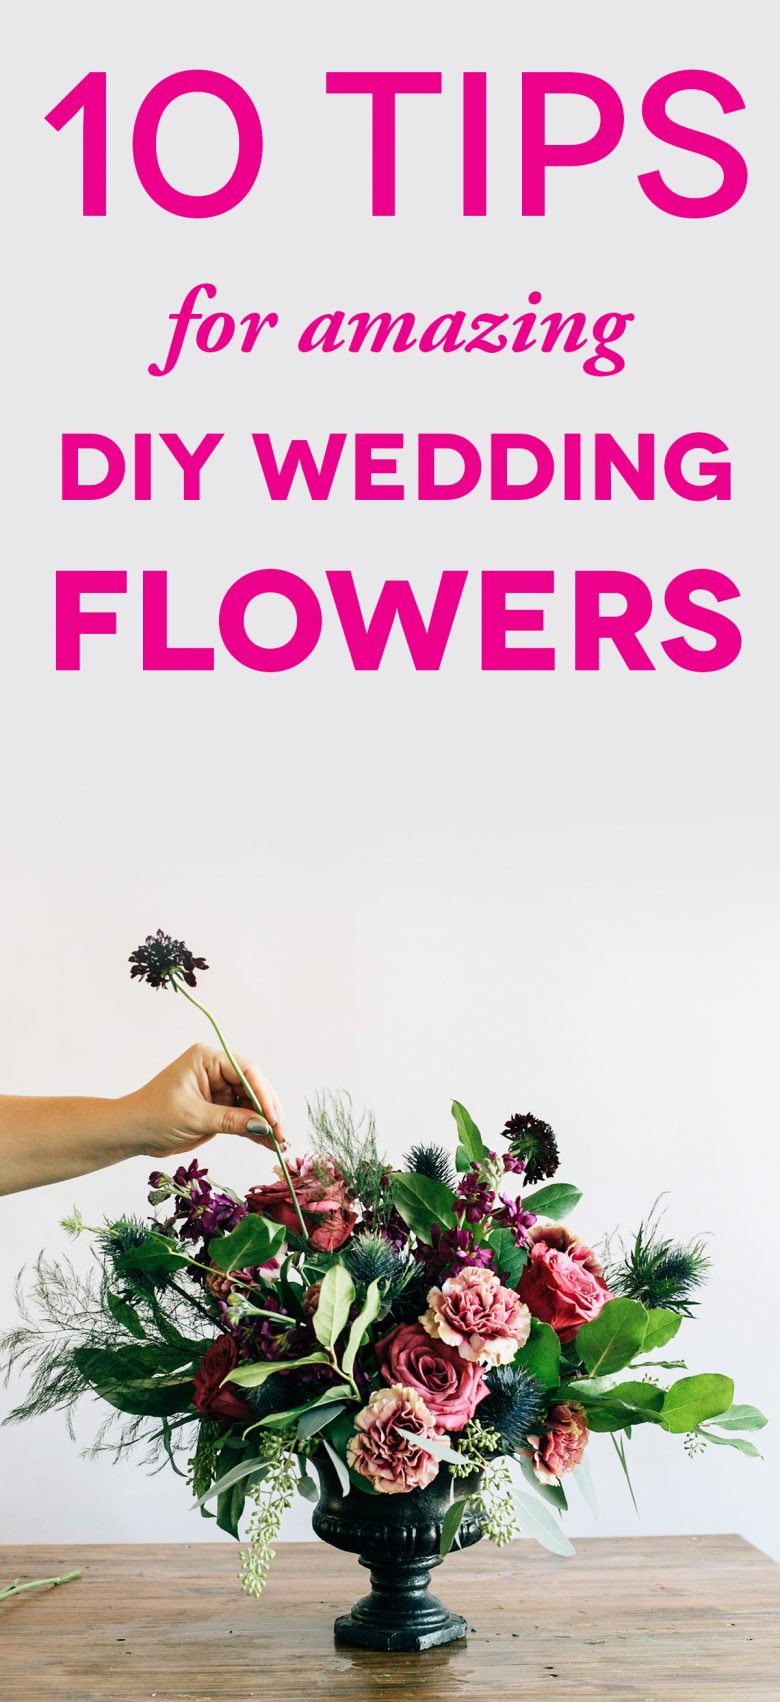 DIY Wedding Flowers Tips
 DIY Wedding Flowers 10 Tips To Save You Stress